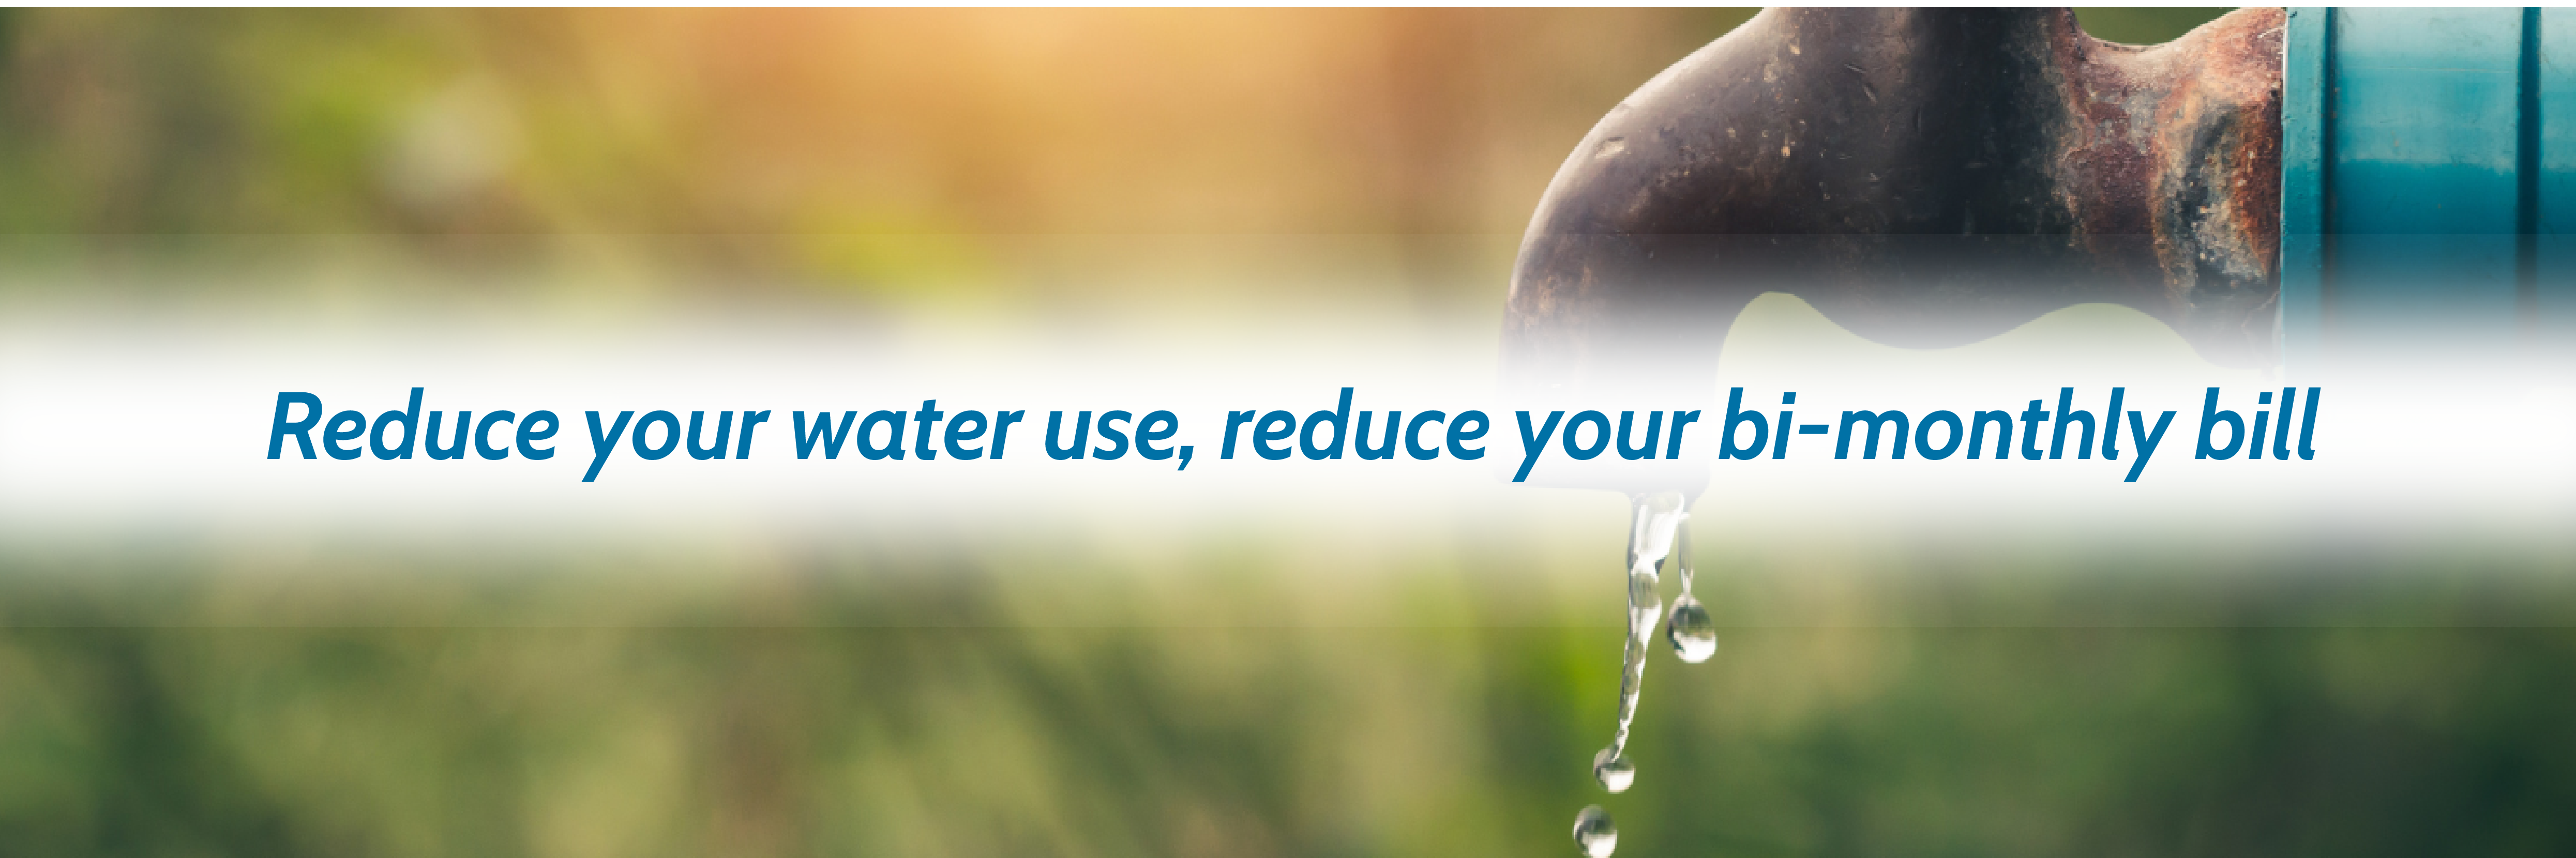 Image of a dripping faucet with the text: Reduce your water use, reduce your bi-monthly bill